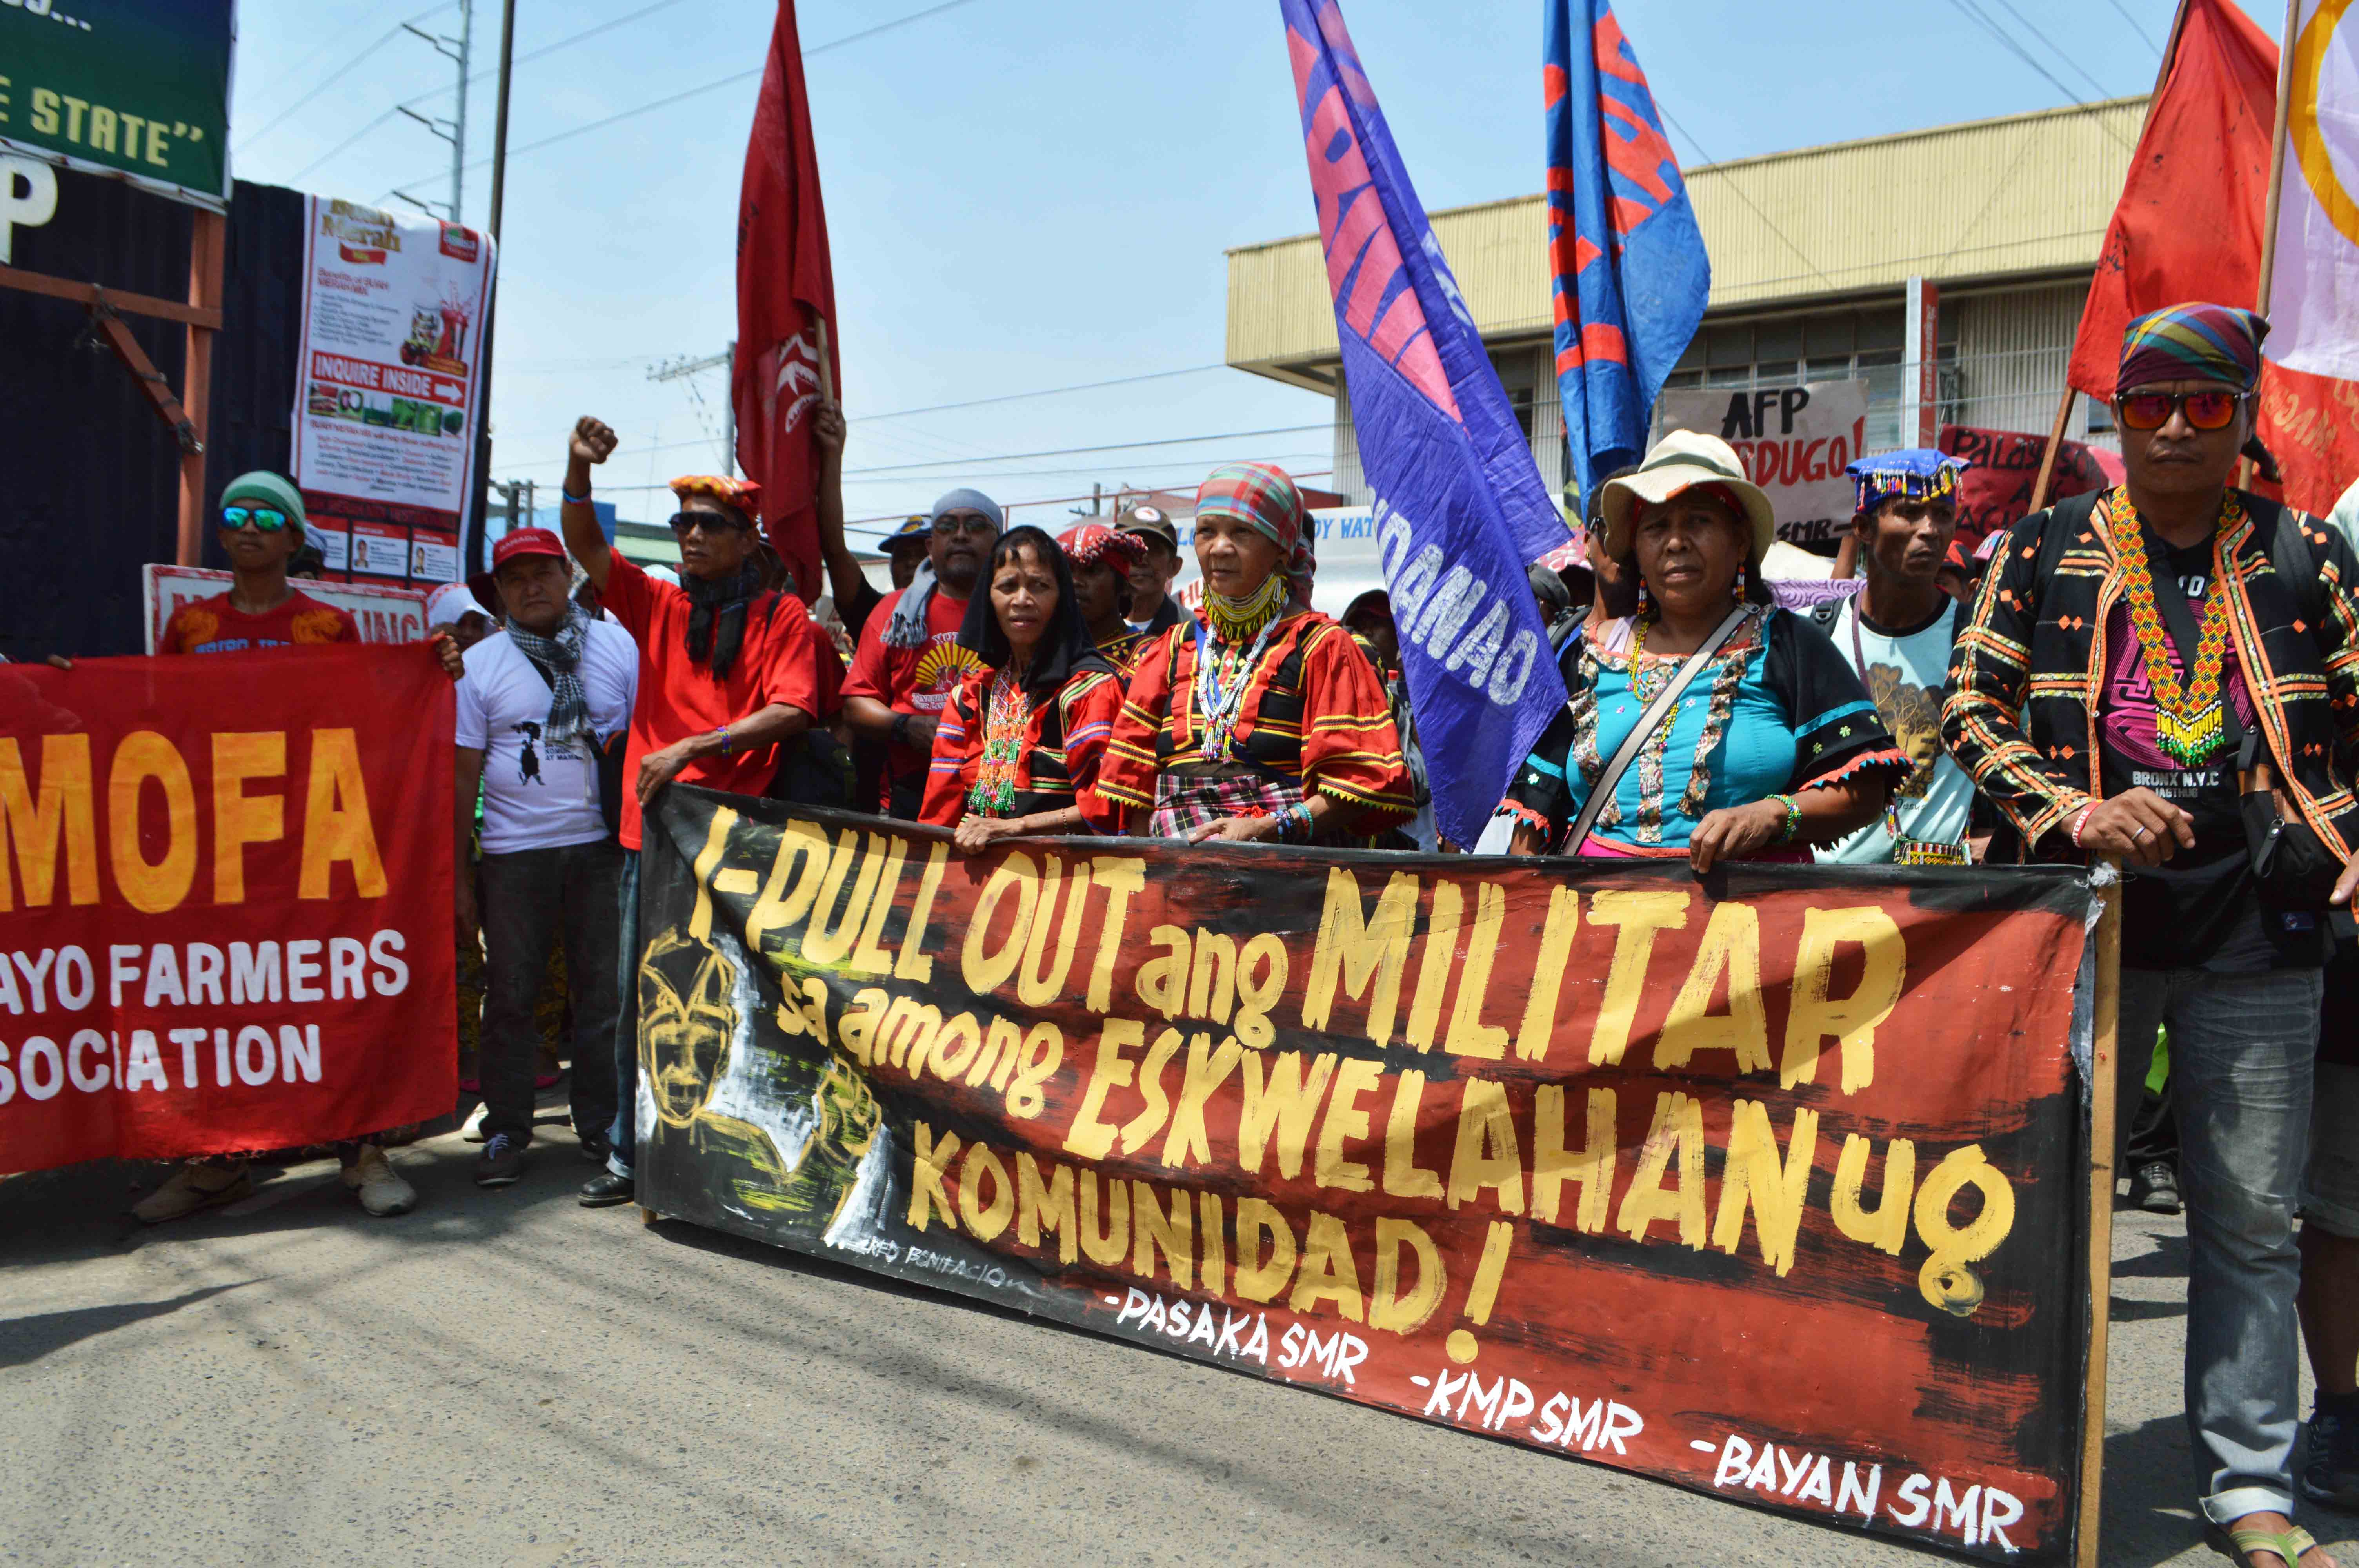 Protesters called for the pullout of military troops in communities during a rally held outside the headquarters of the Eastern Mindanao Command.